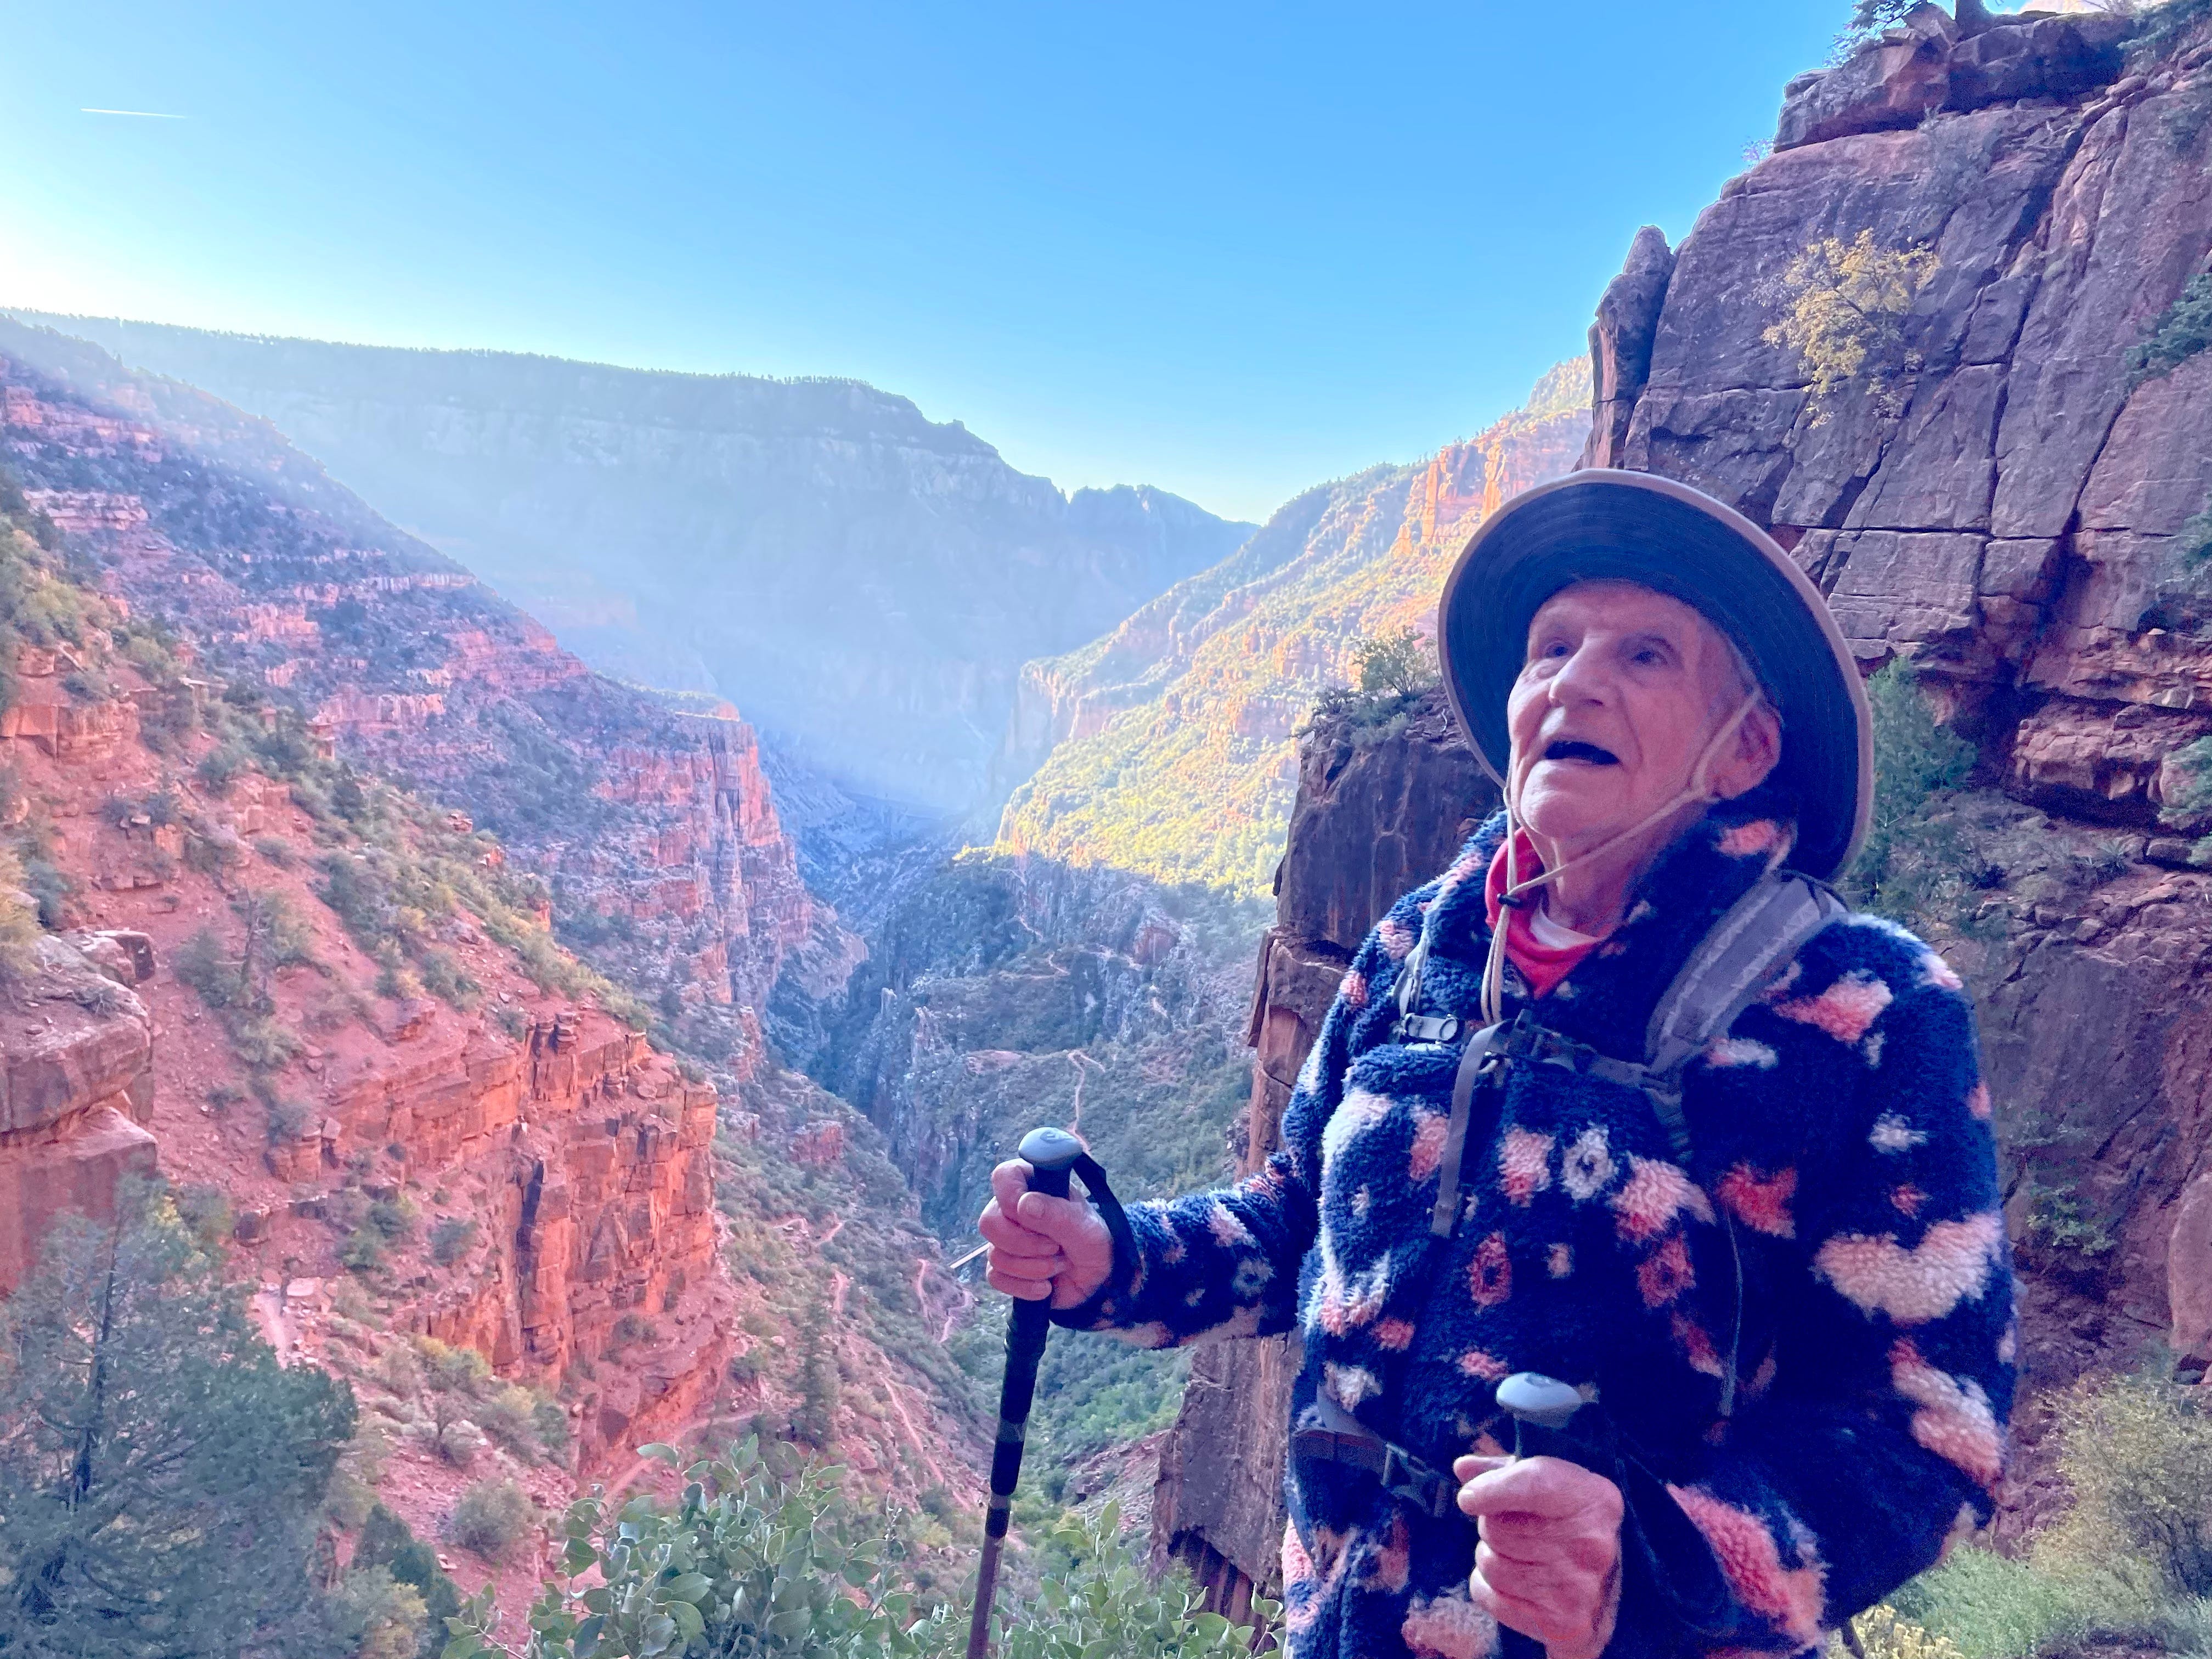 Alfredo Aliaga: 92-year-old breaks Guinness world record to become oldest person to hike Grand Canyon rim-to-rim